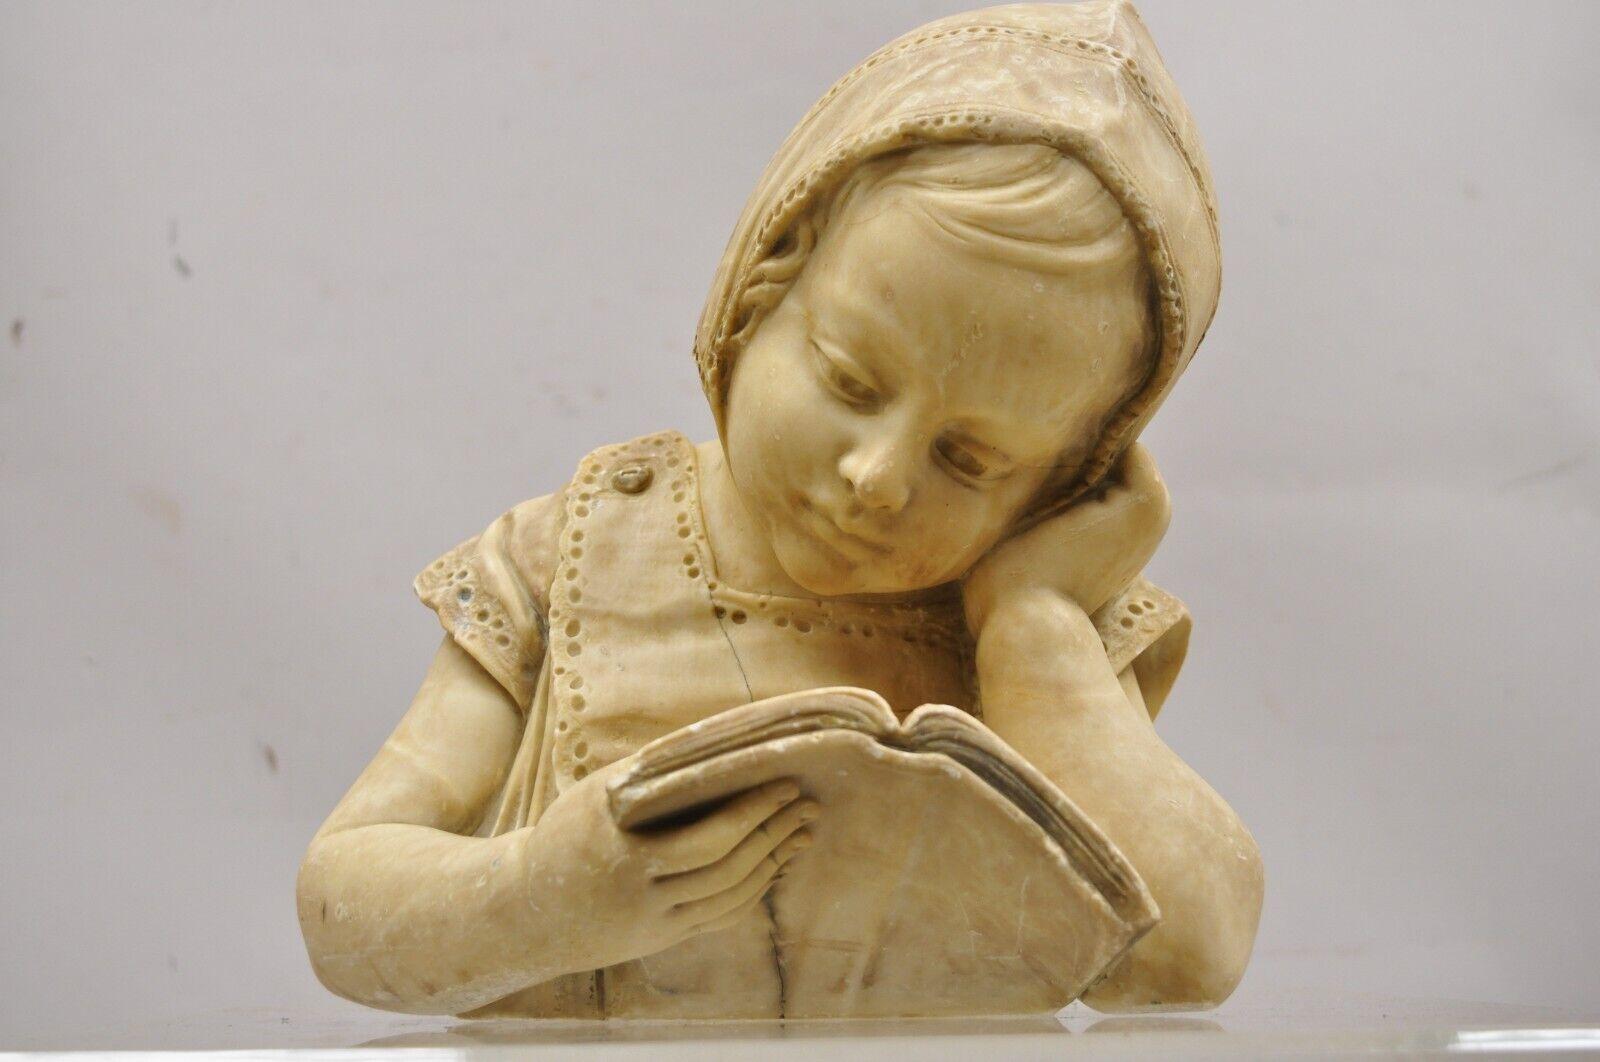 Antique Victorian Carved Italian Marble Bust Girl Reading Book Statue Sculpture. Item features remarkable carving and detail, desirable subject and form, original patina, approx 30 lbs. Circa 1900. Measurements: 11